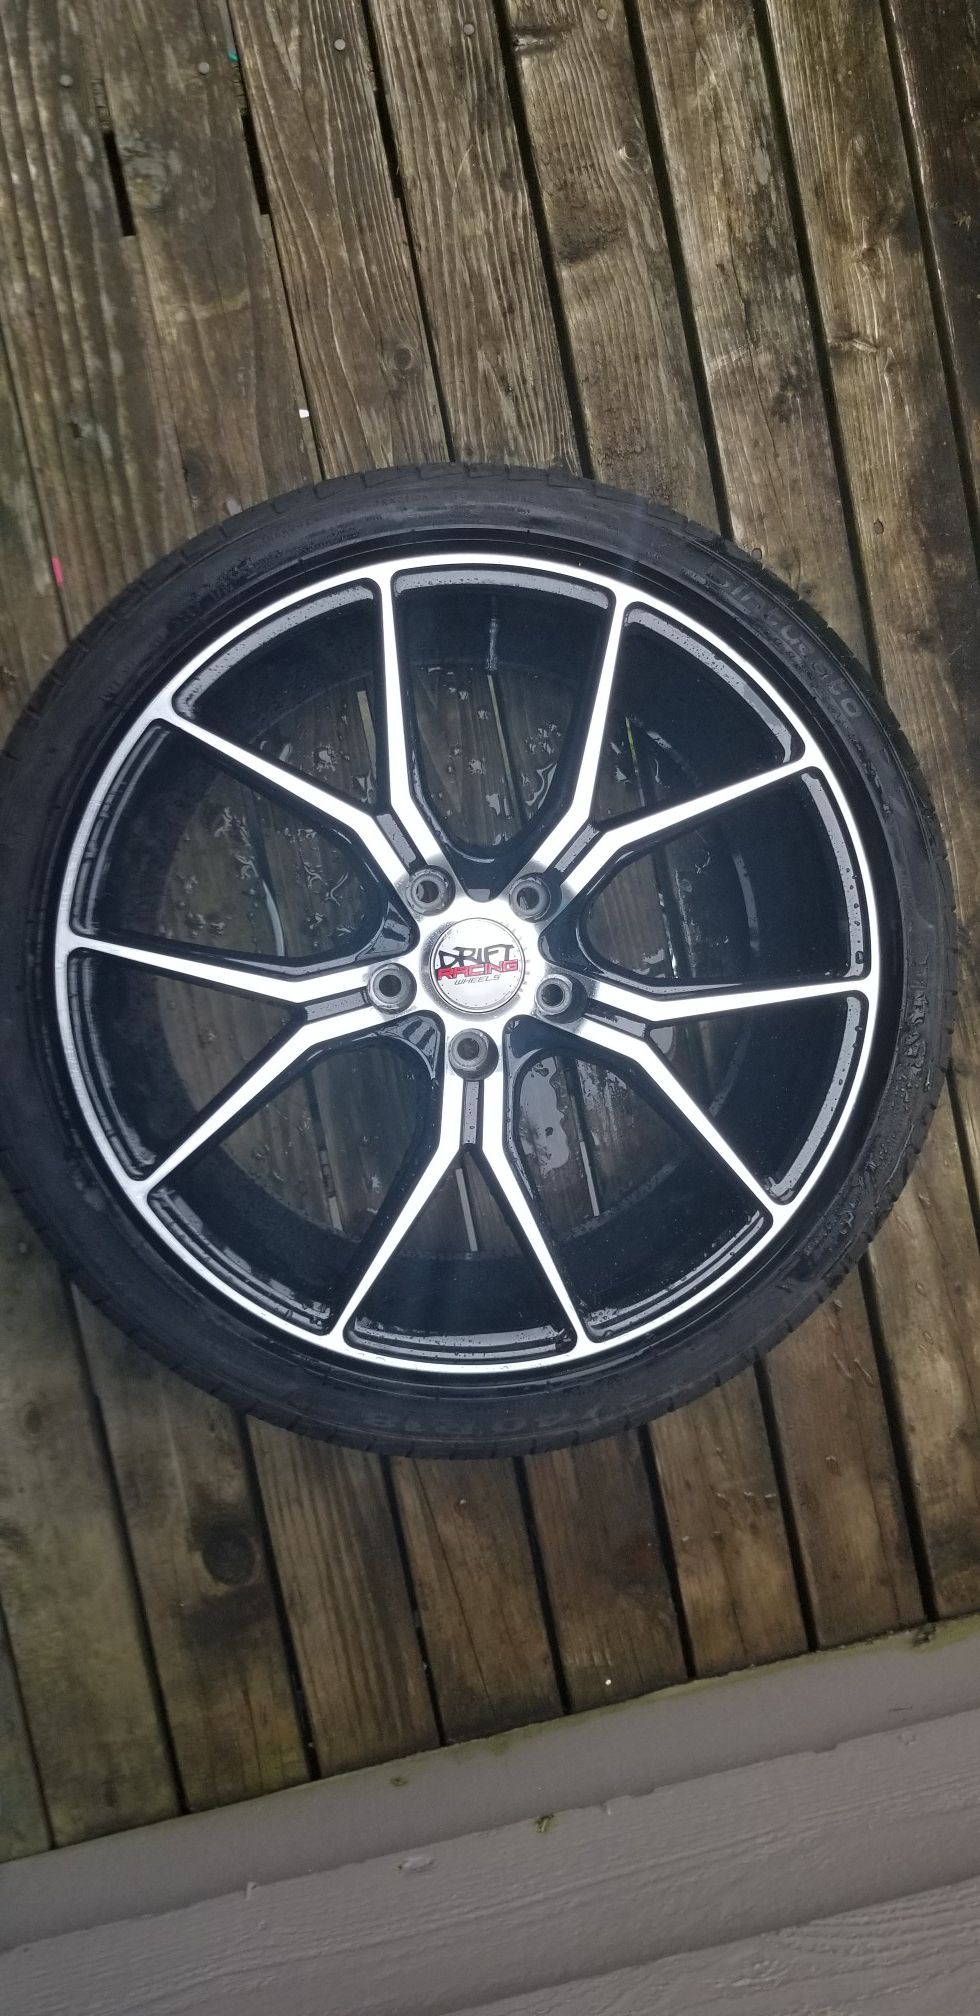 One 18 inch wheel with tire 225/40/18